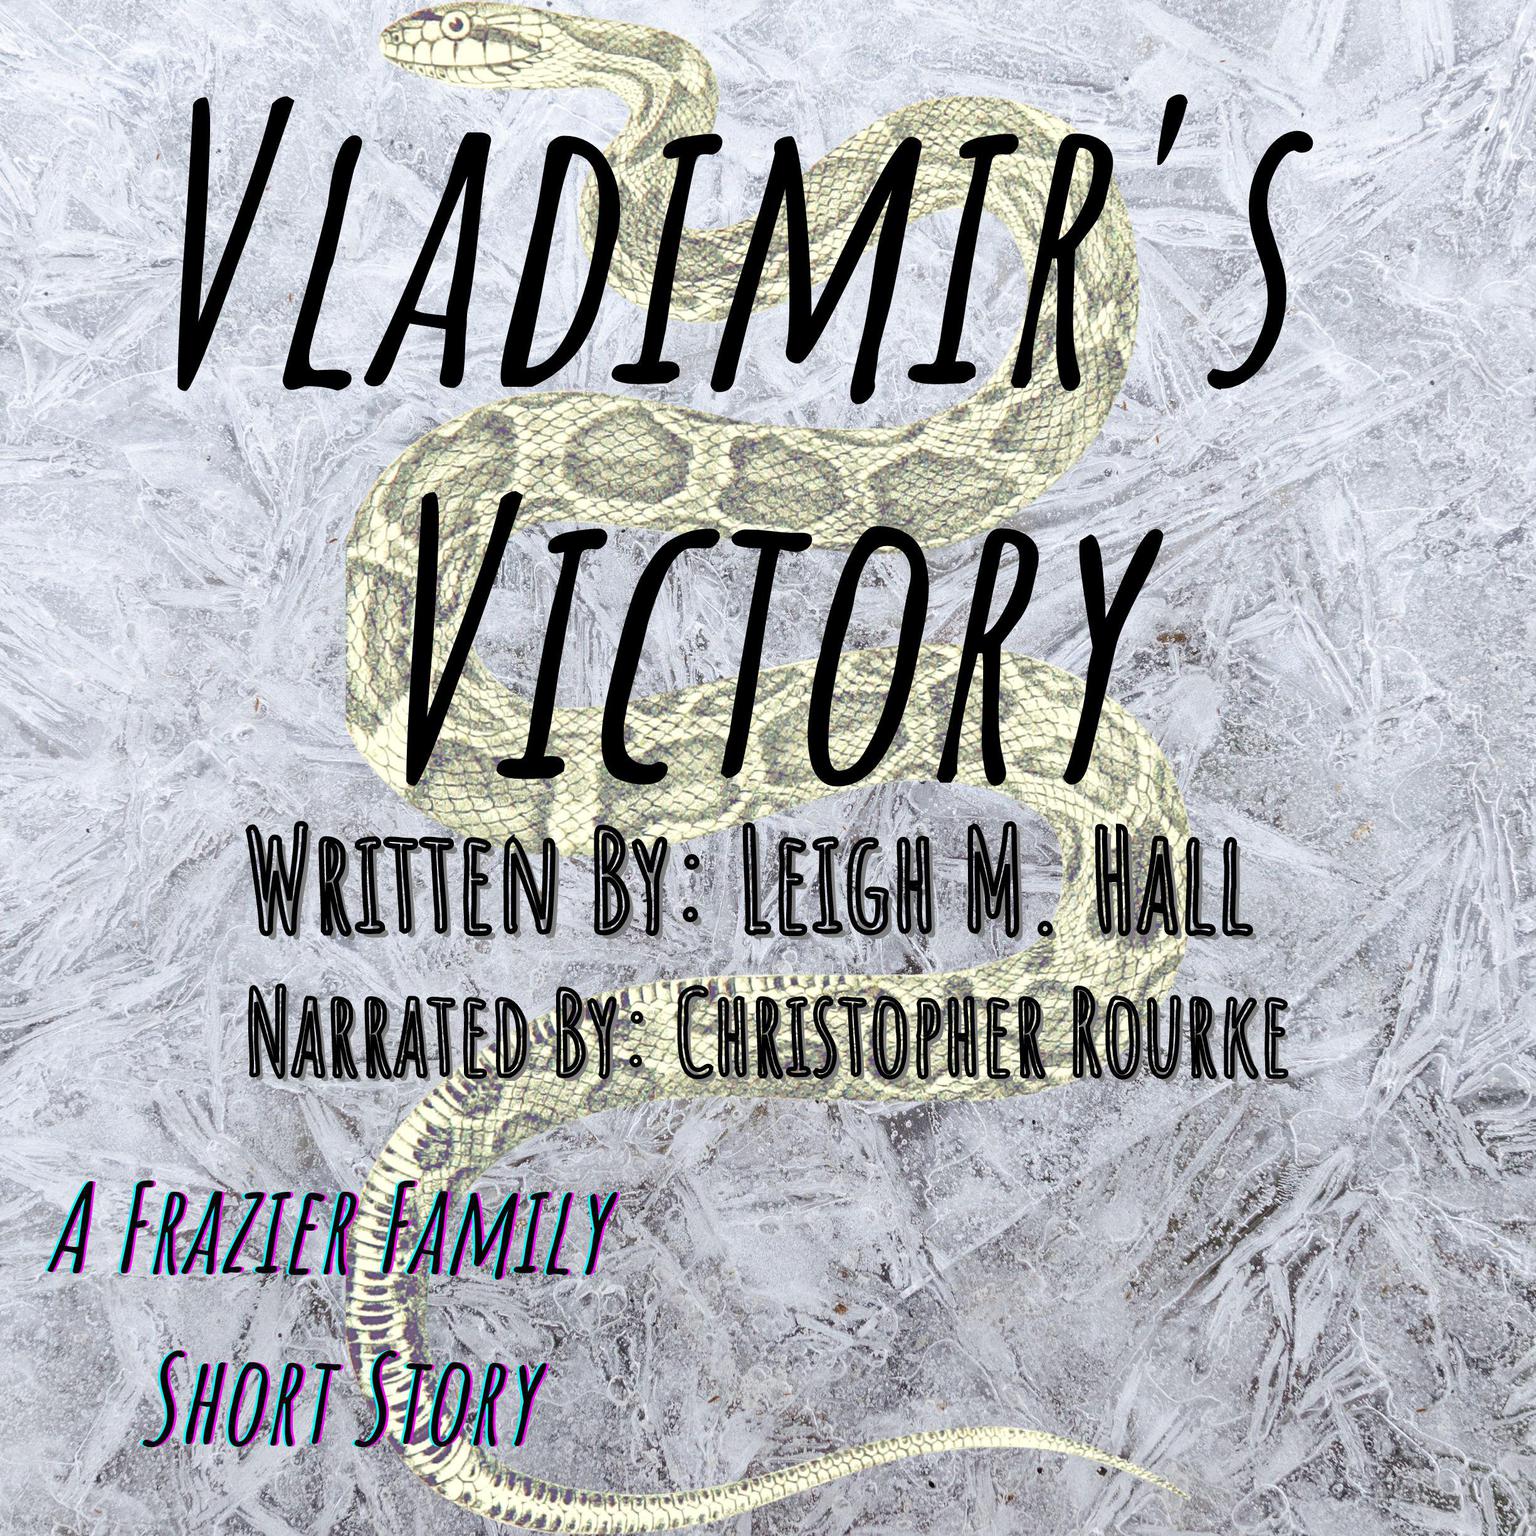 Vladimirs Victory: A Frazier Family Side Piece Audiobook, by Christopher Rourke